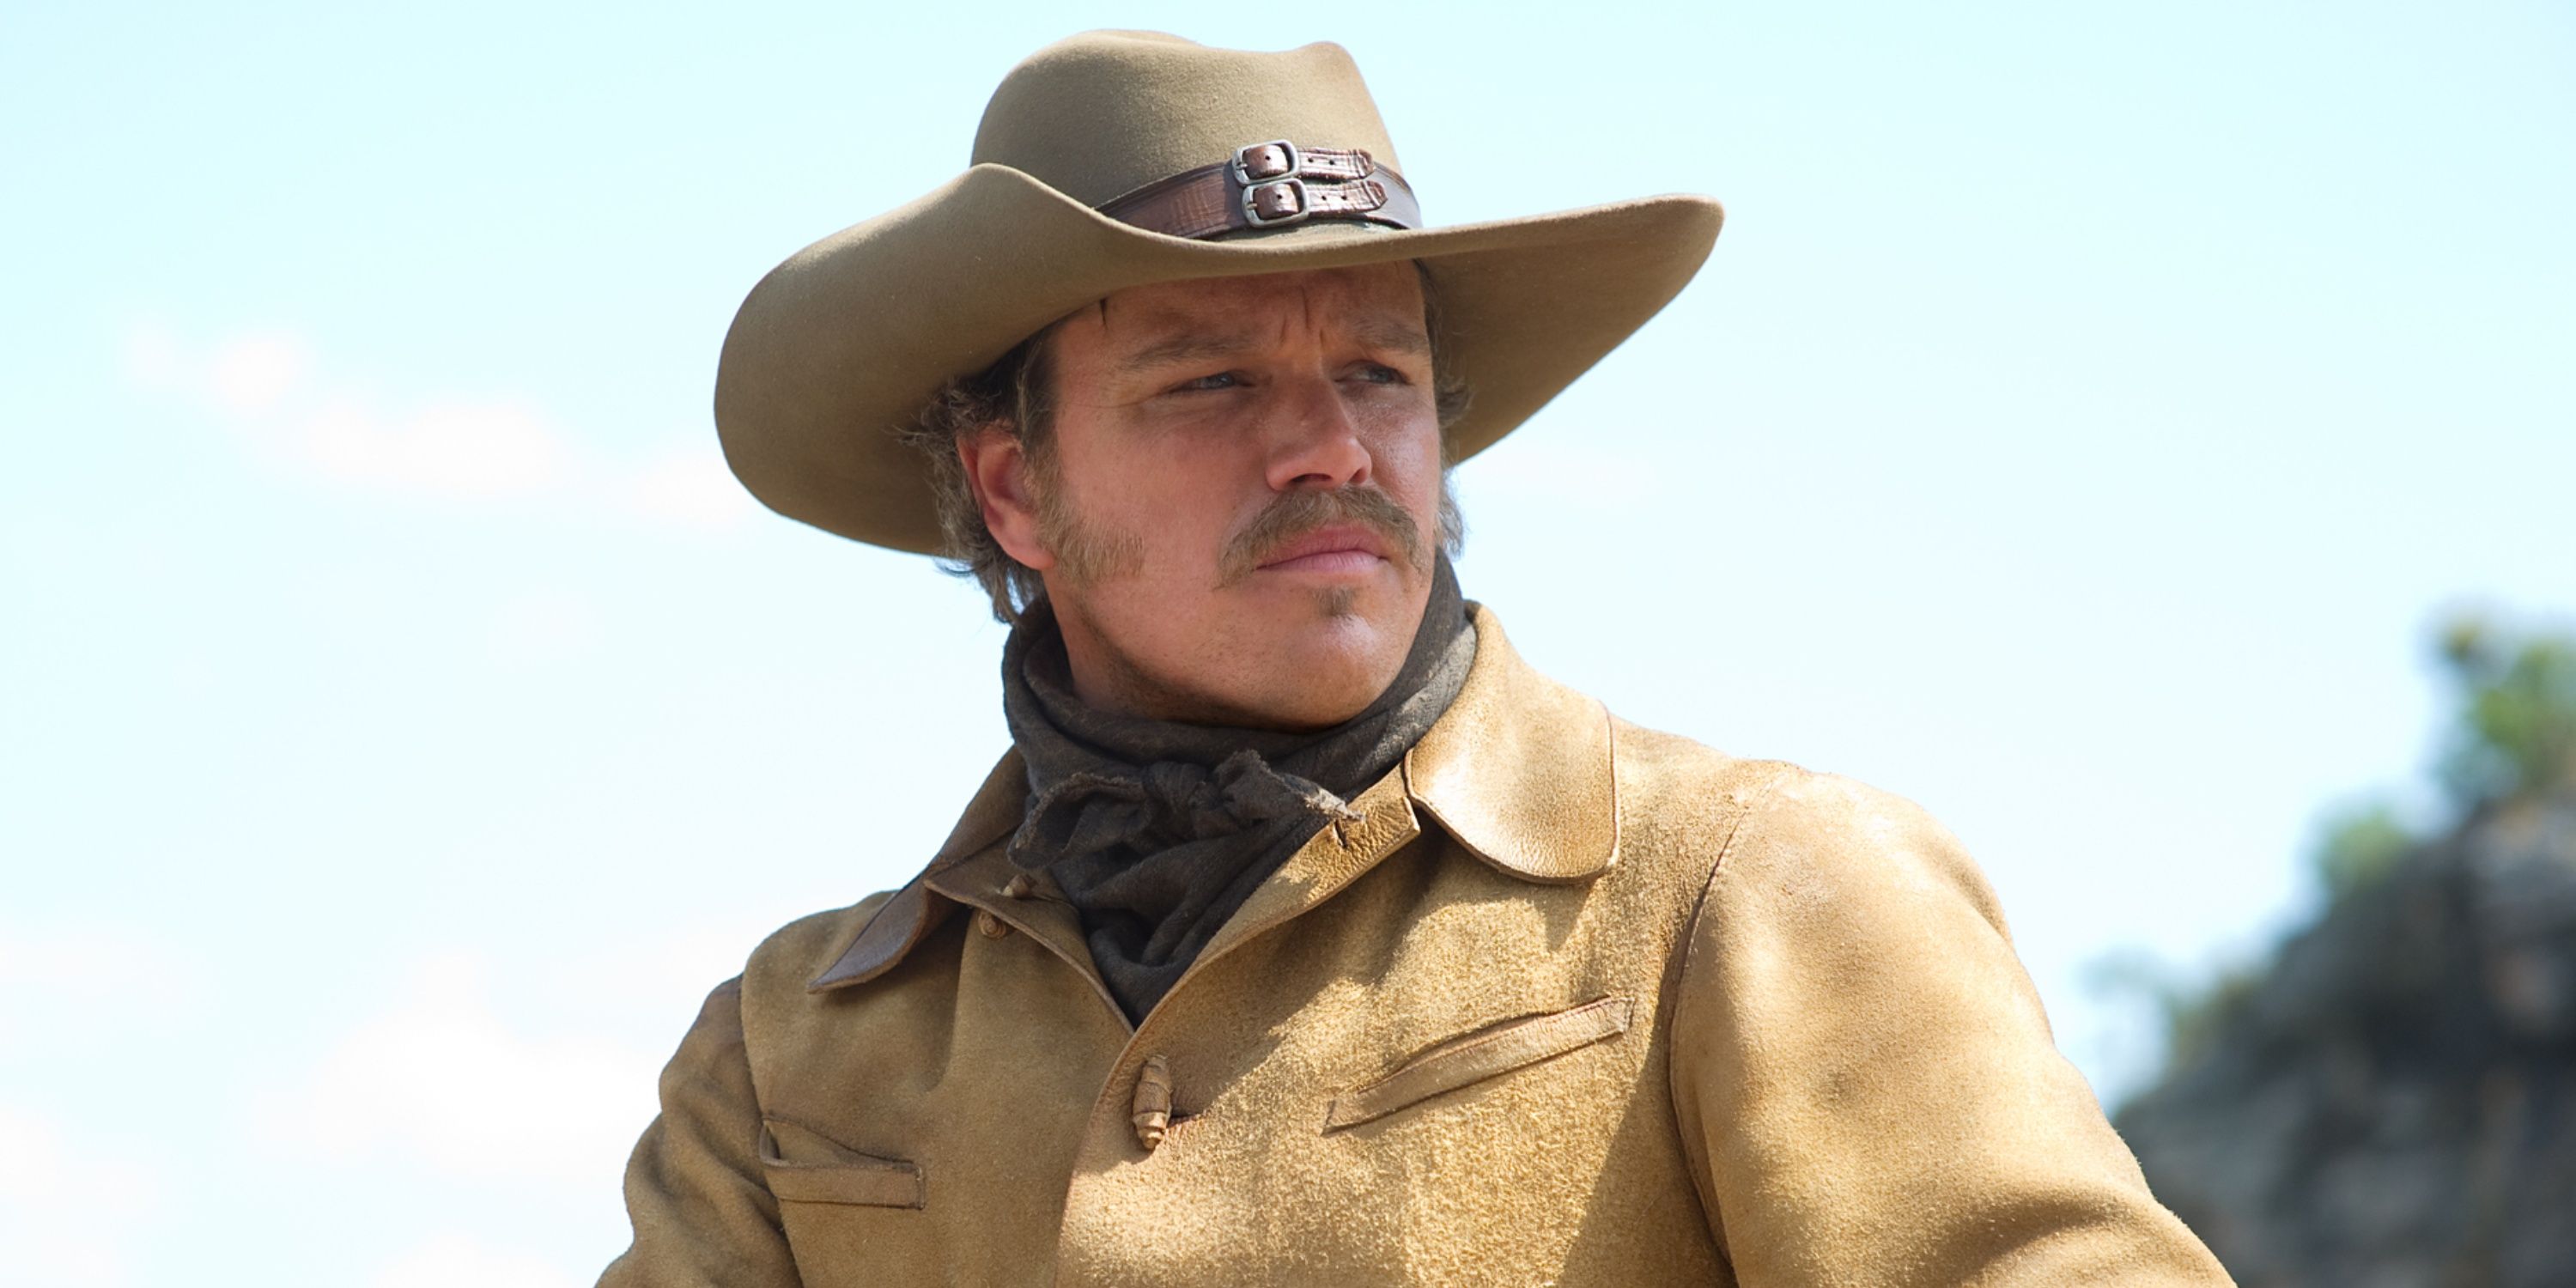 Matt Damon as Texas Ranger LaBoeuf looking to the distance in the film True Grit